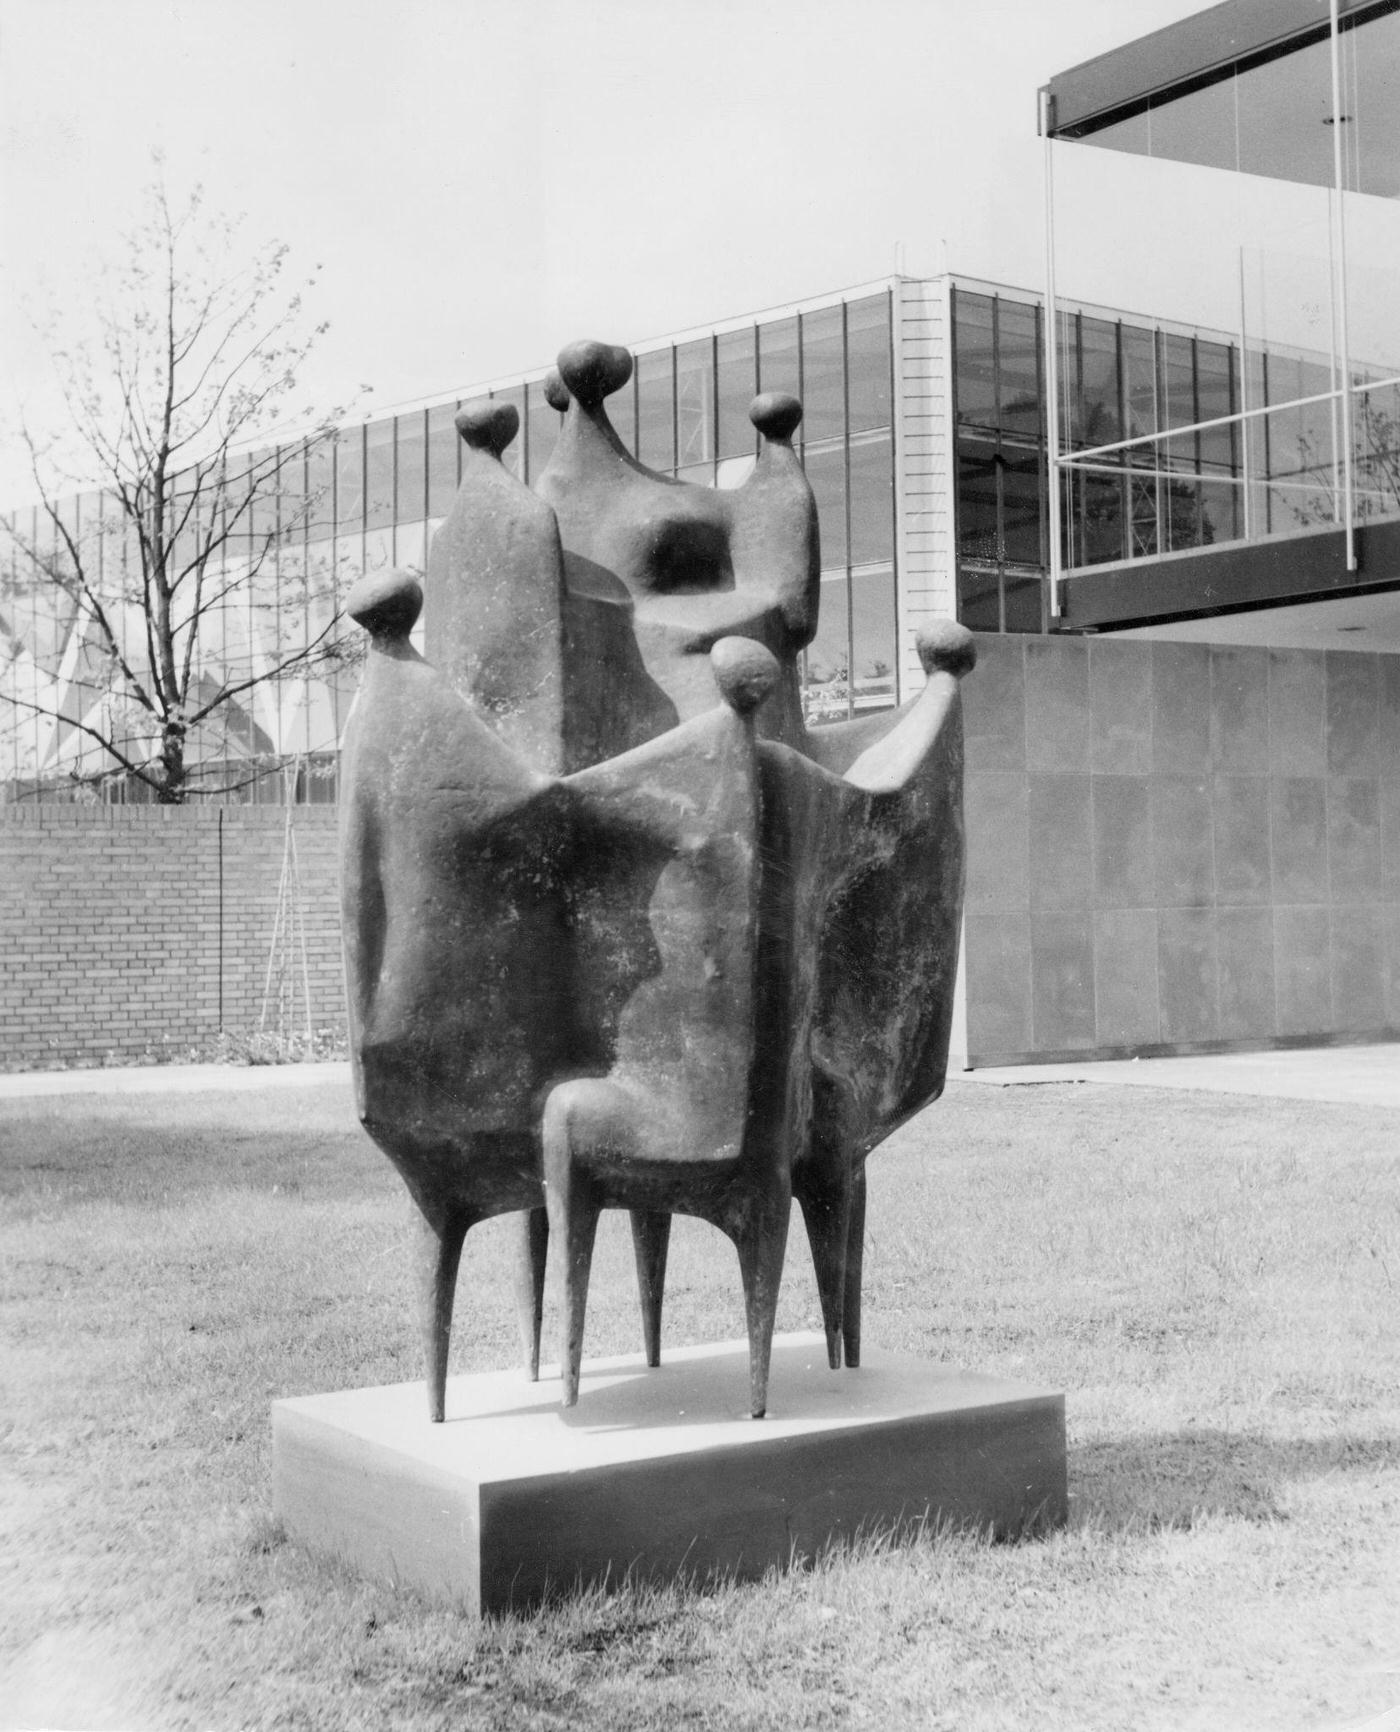 Sculpture by Fritz Koenig 'Mother and children' in front of the German Pavilion